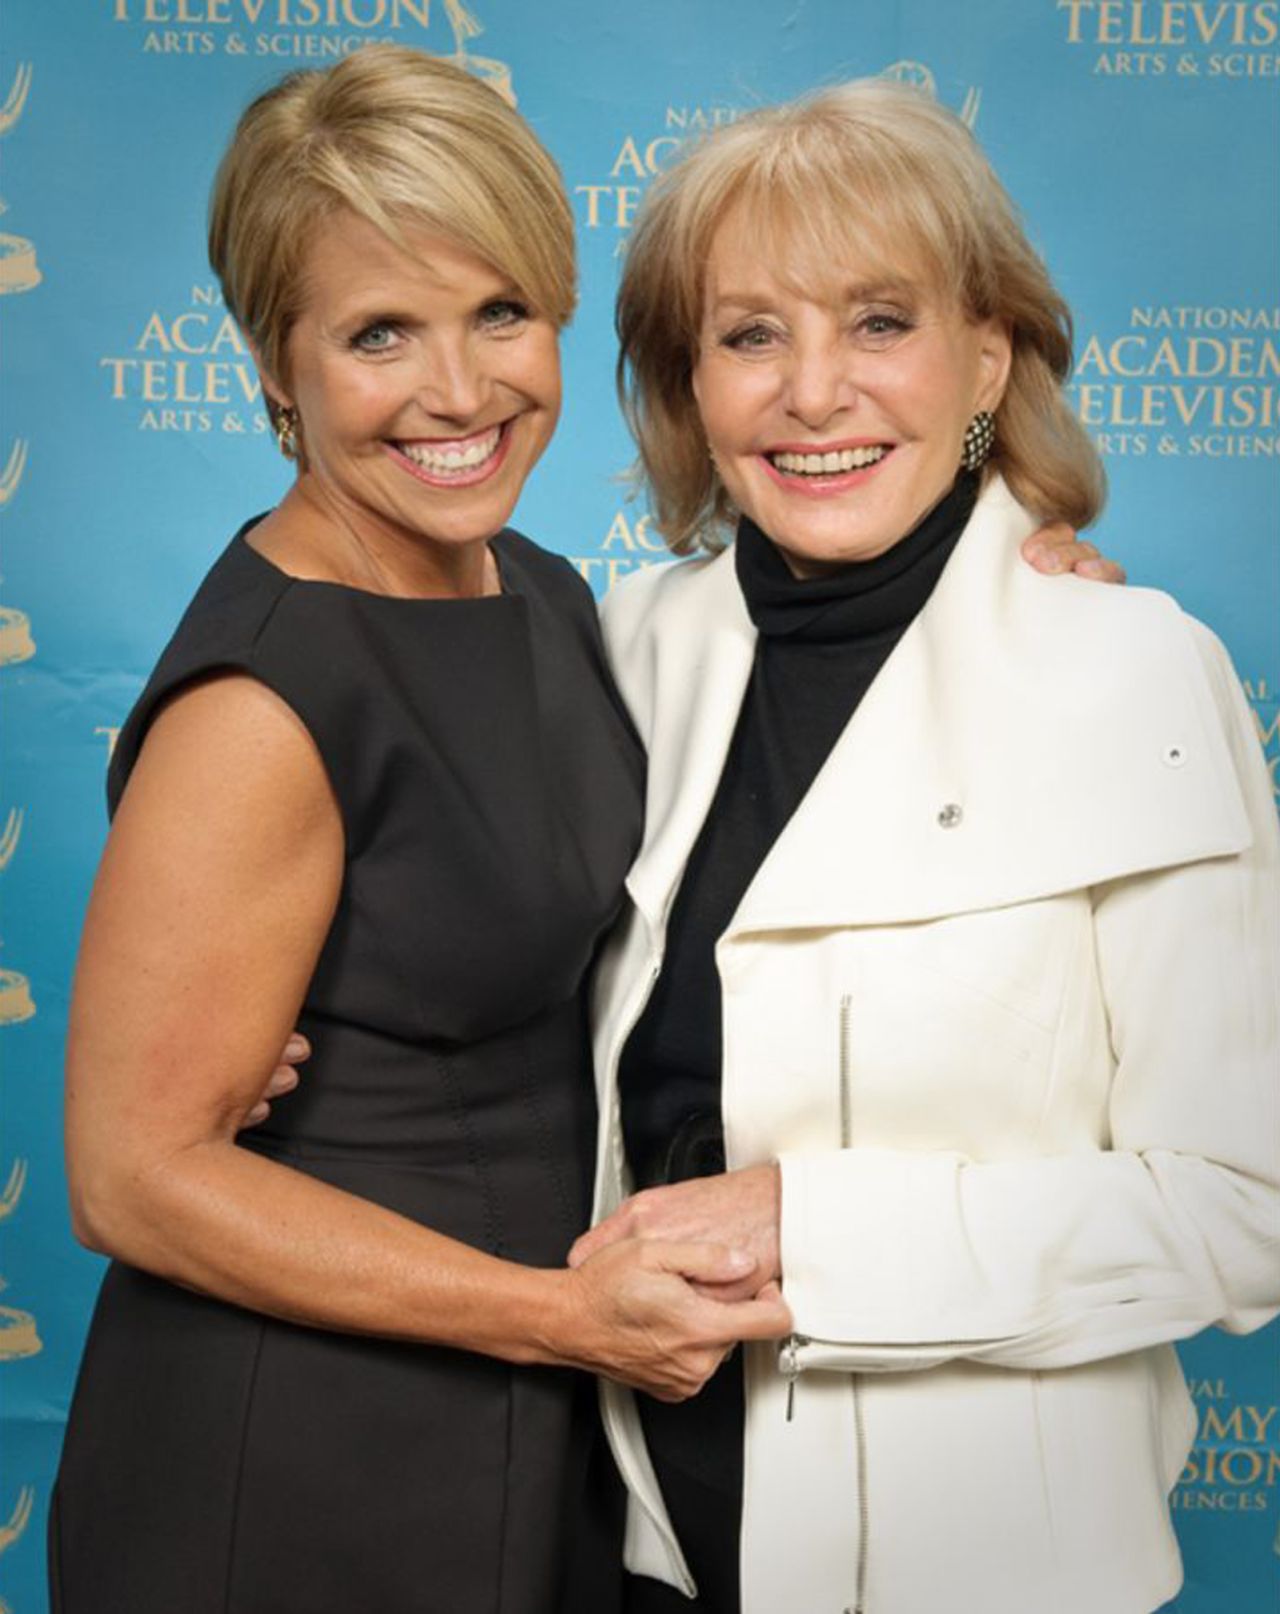 Walters and fellow TV journalist Katie Couric attend the Emmy Awards in 2009.